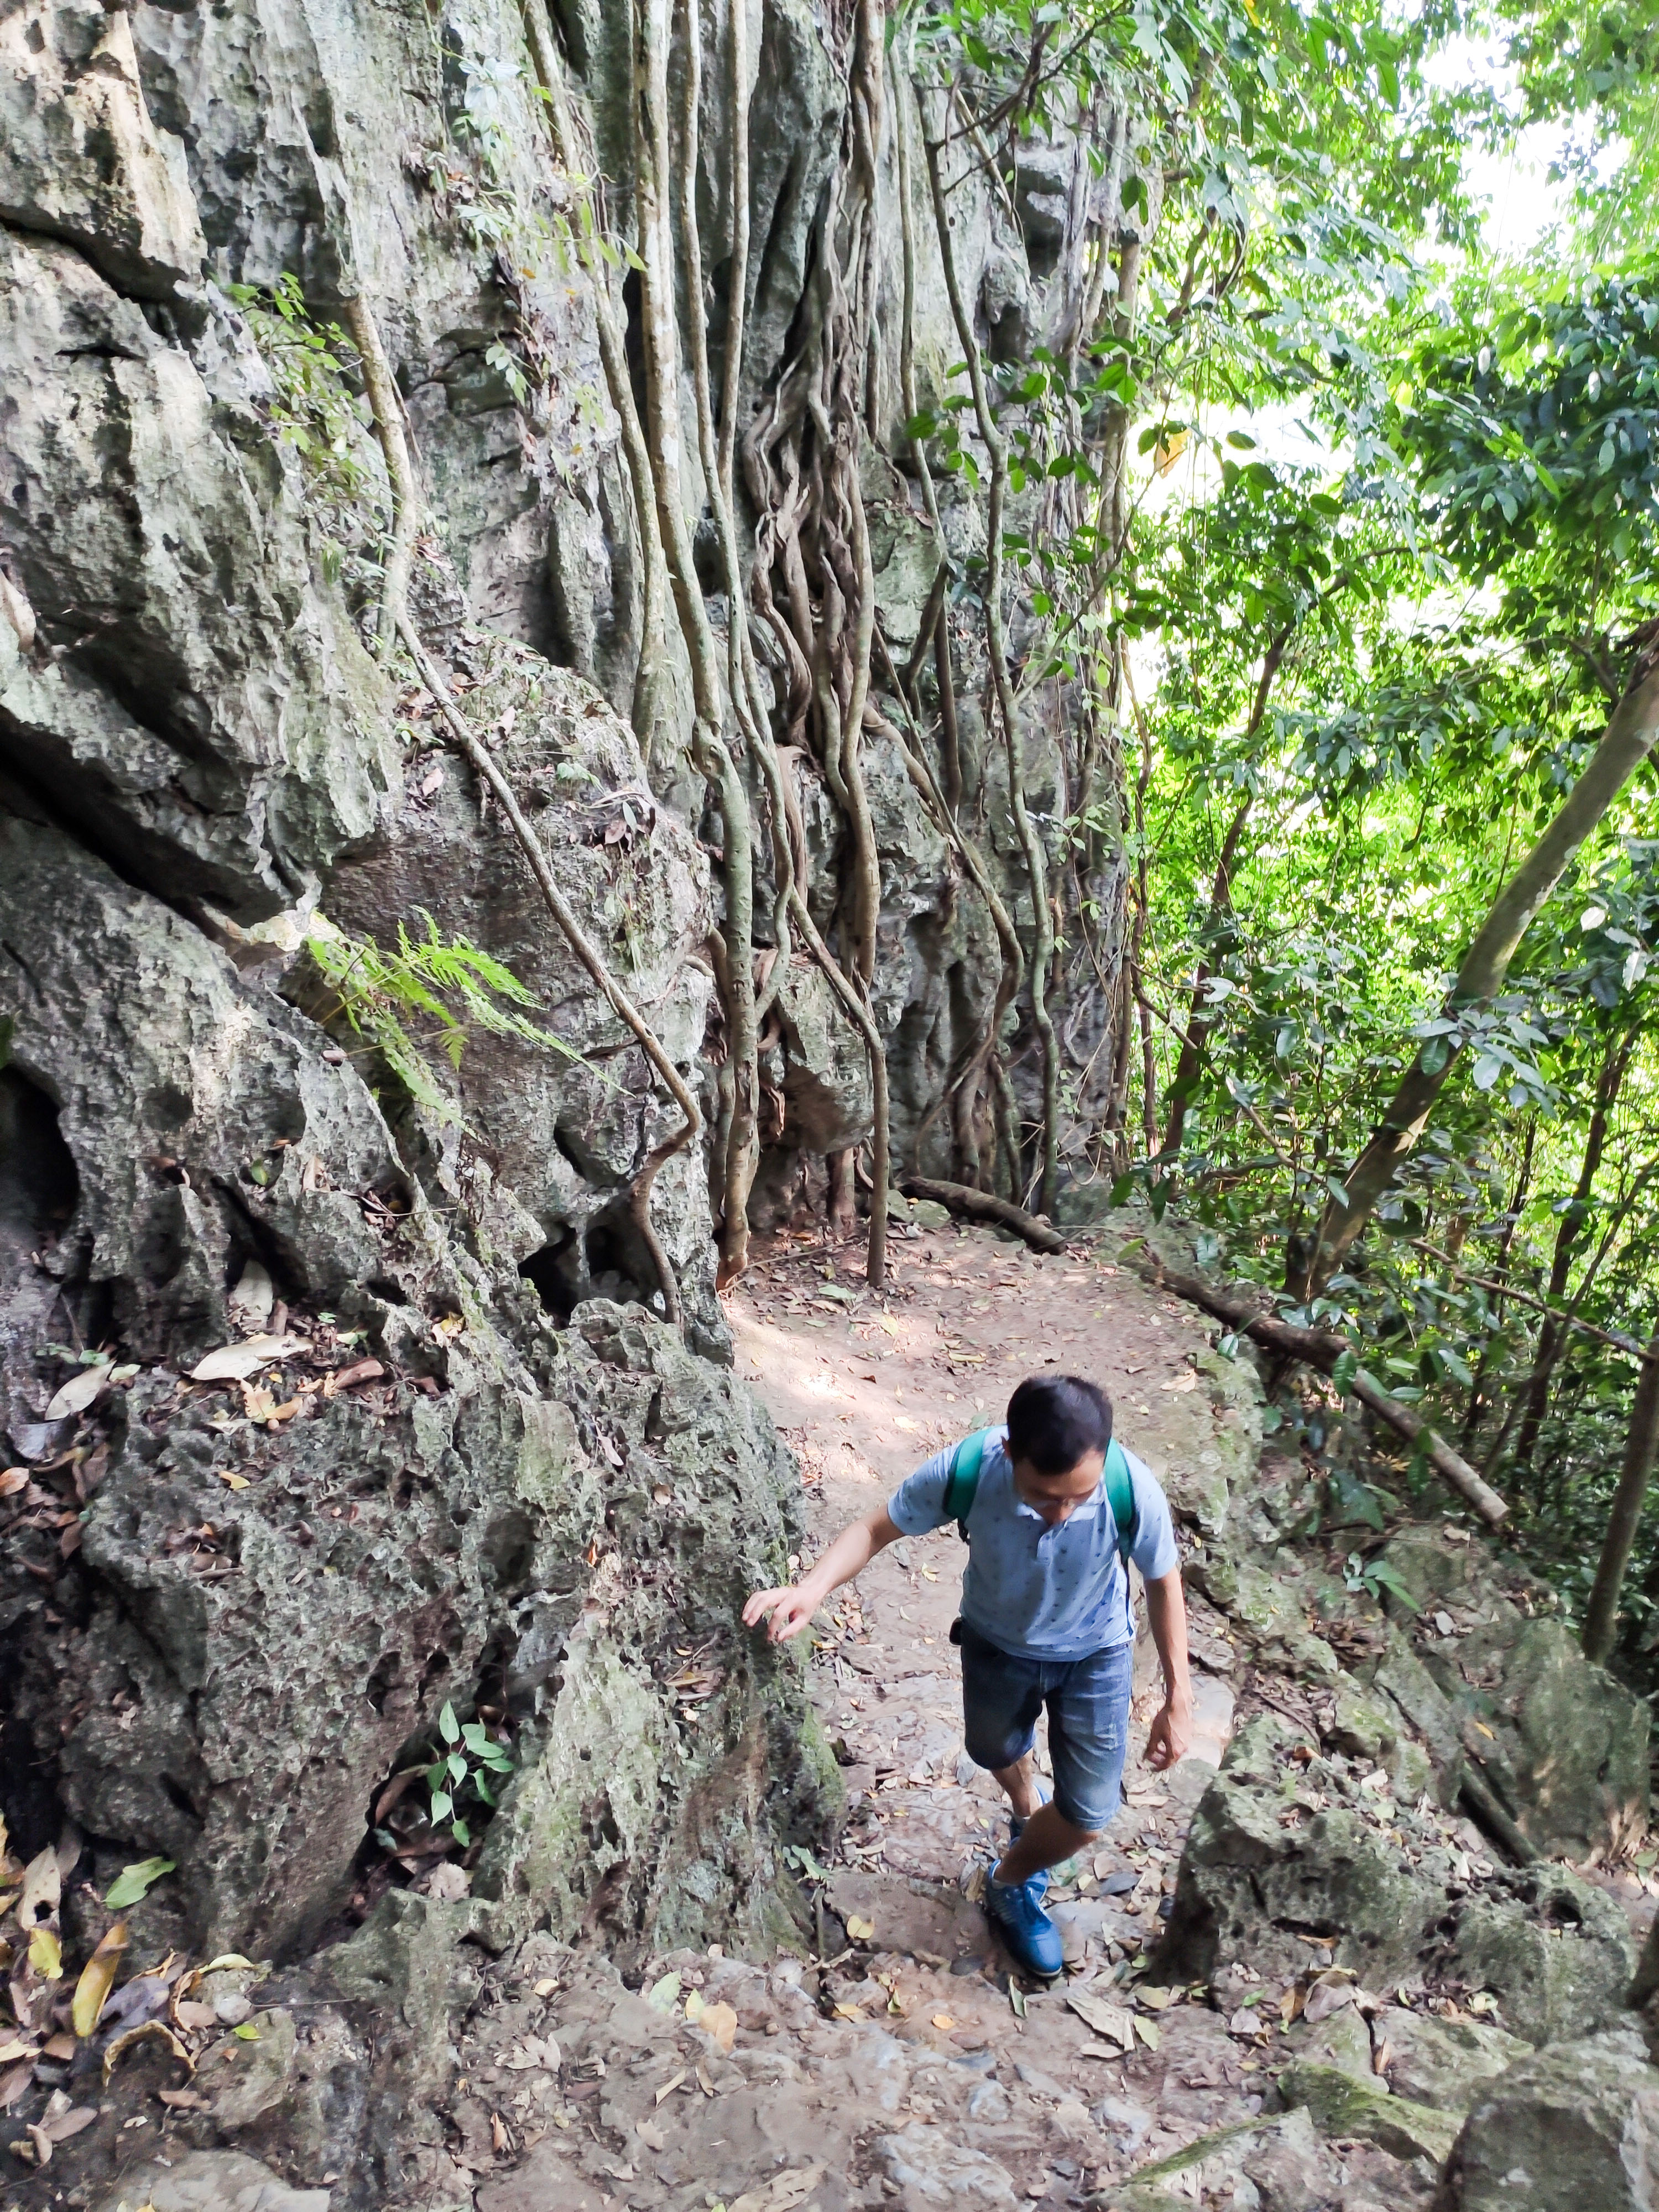 Trekking at Cuc Phuong National Park - Day trips from Hanoi